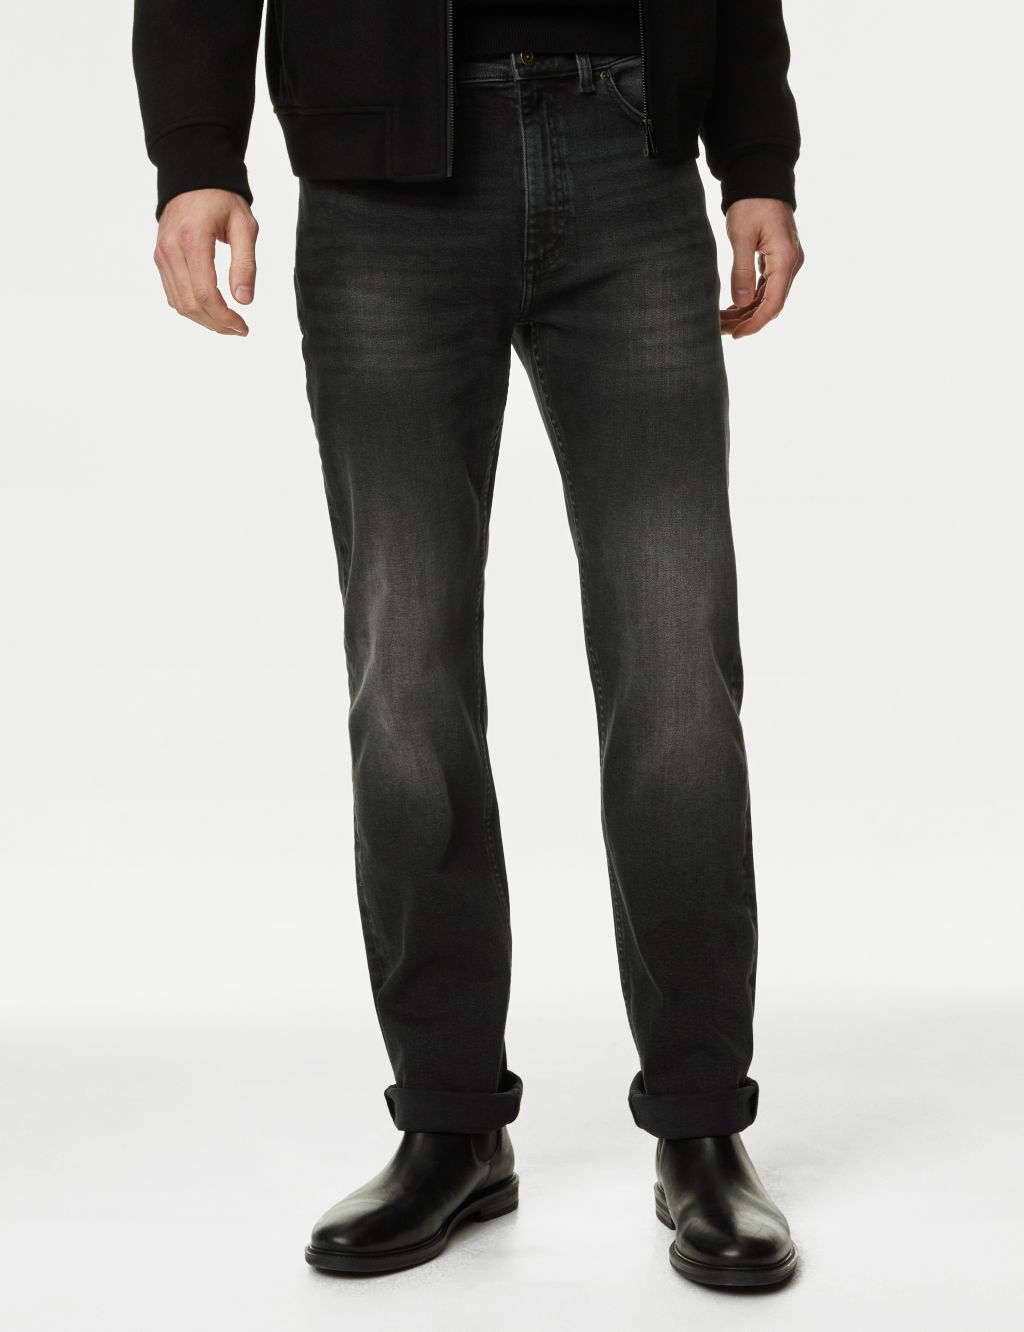 Straight Fit Vintage Wash Stretch Jeans image 1